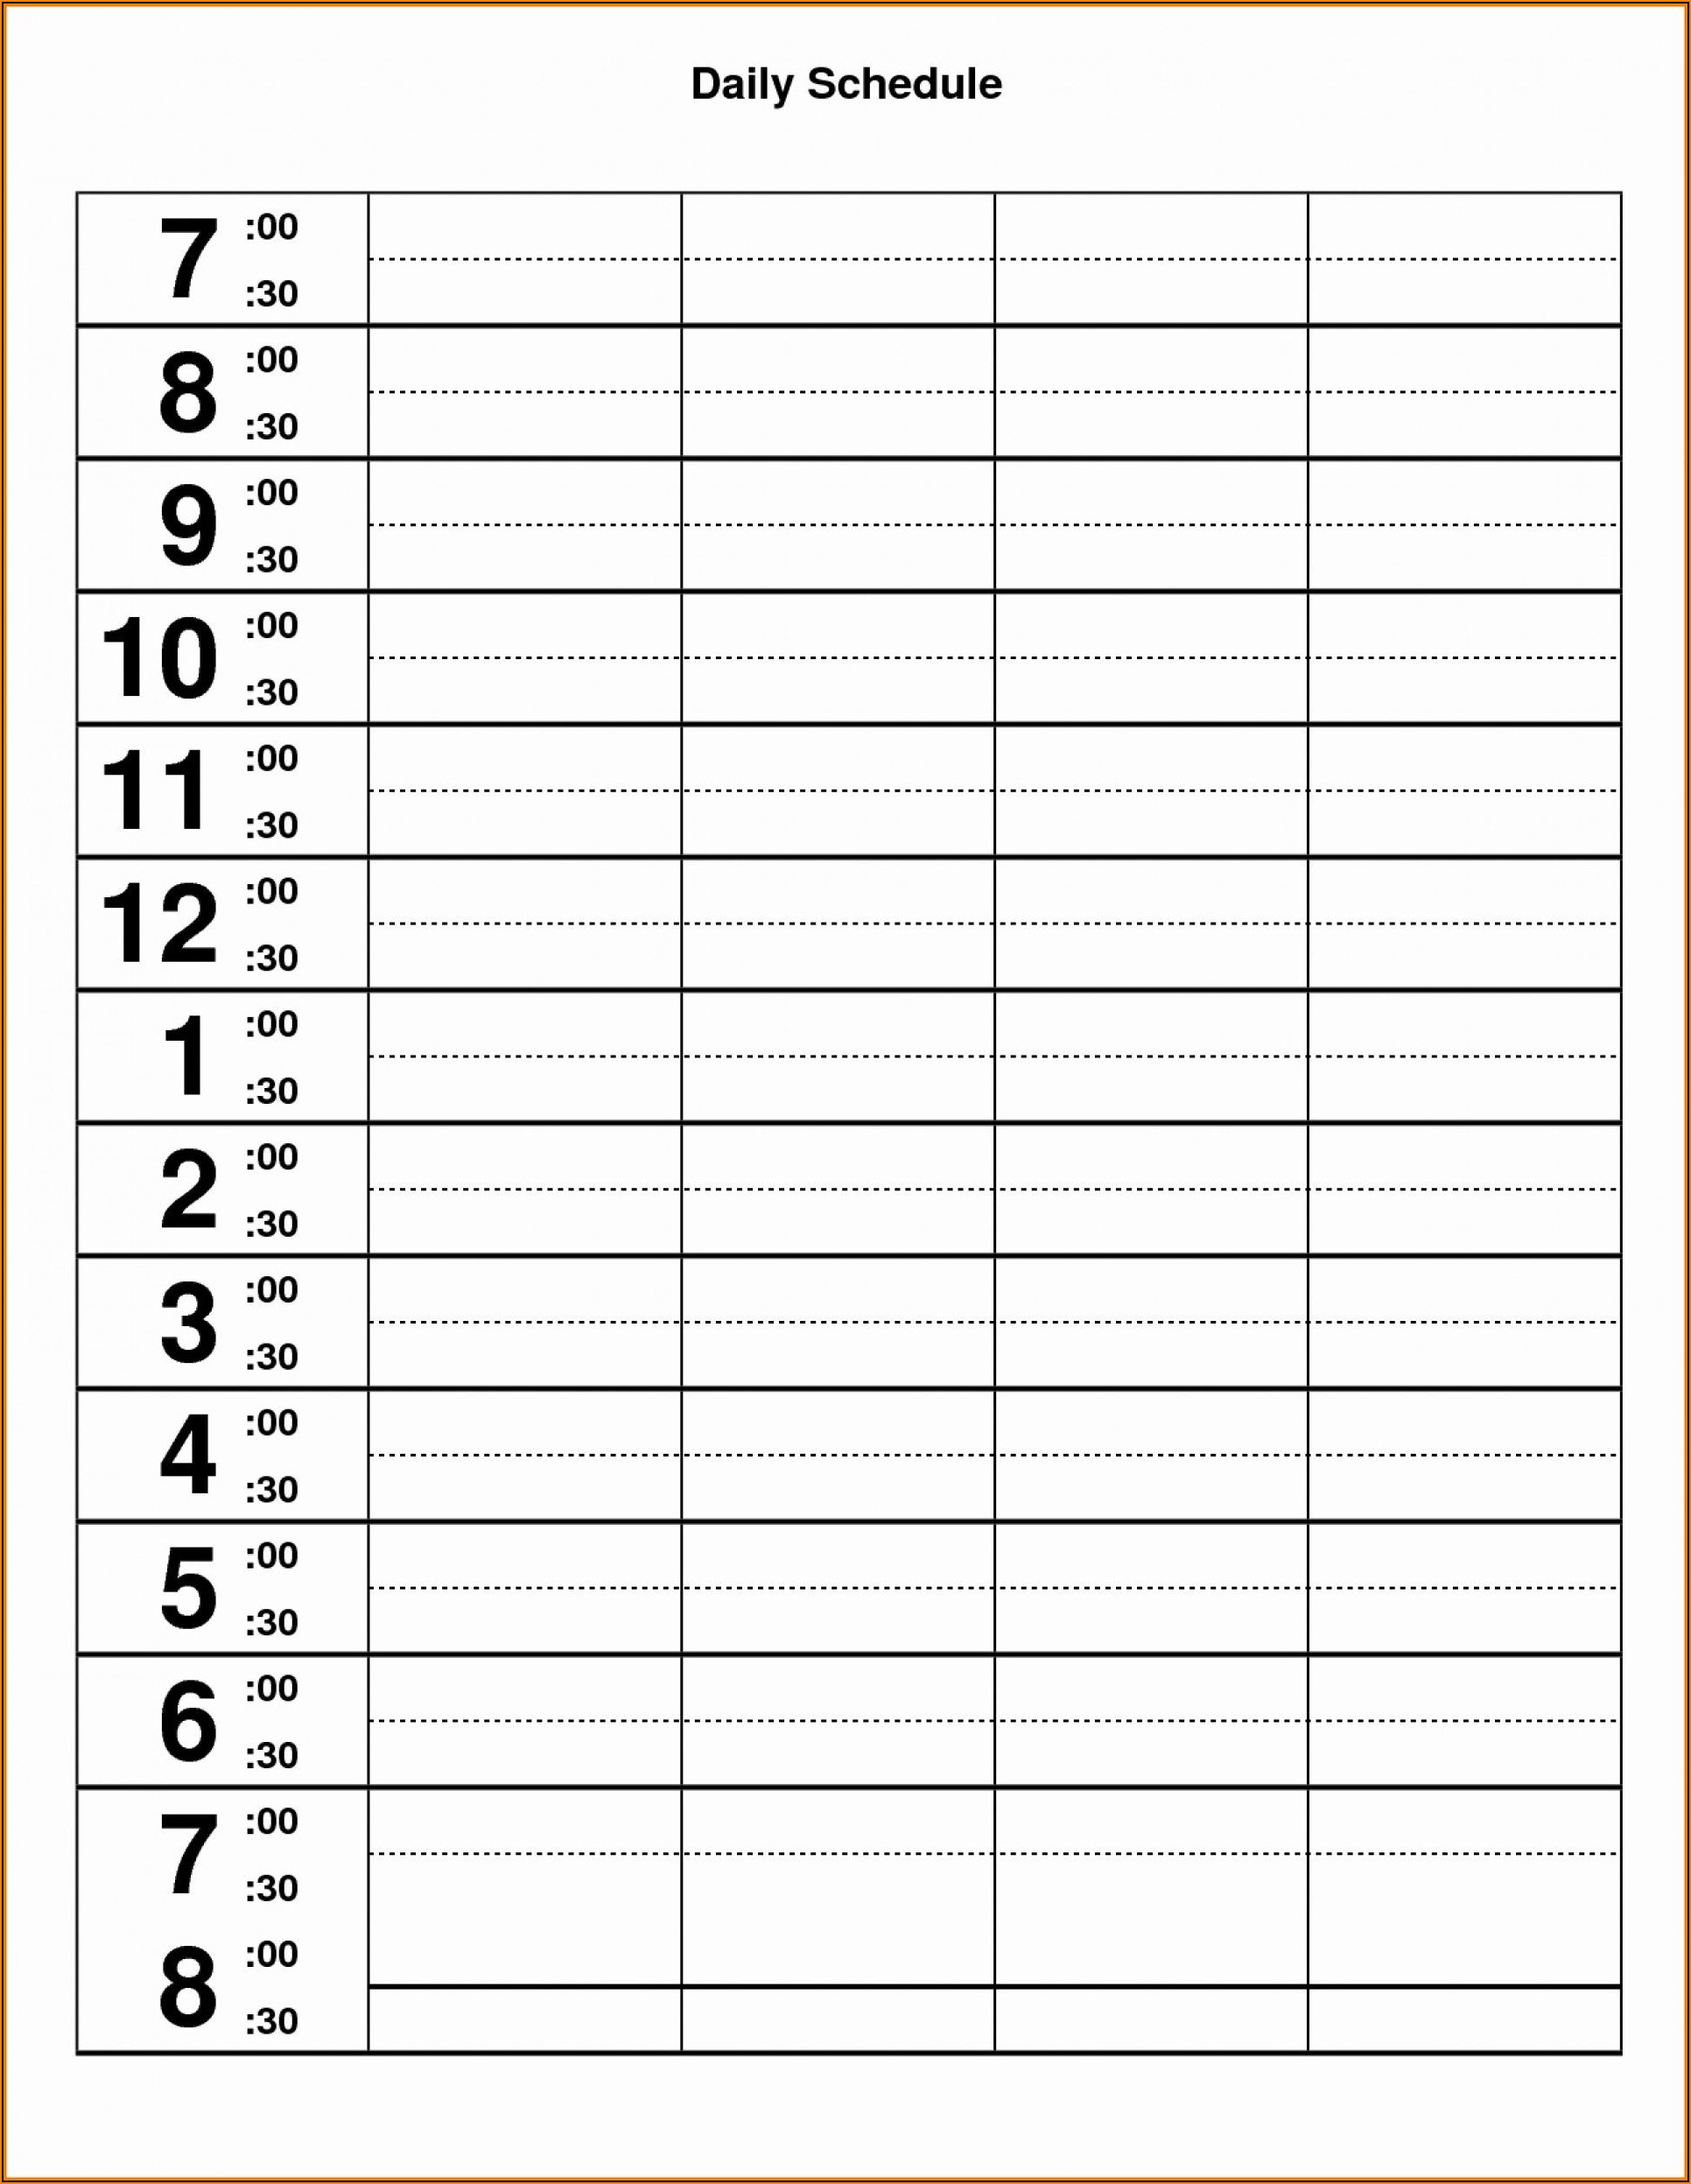 Daily Schedule Planner Template Excel